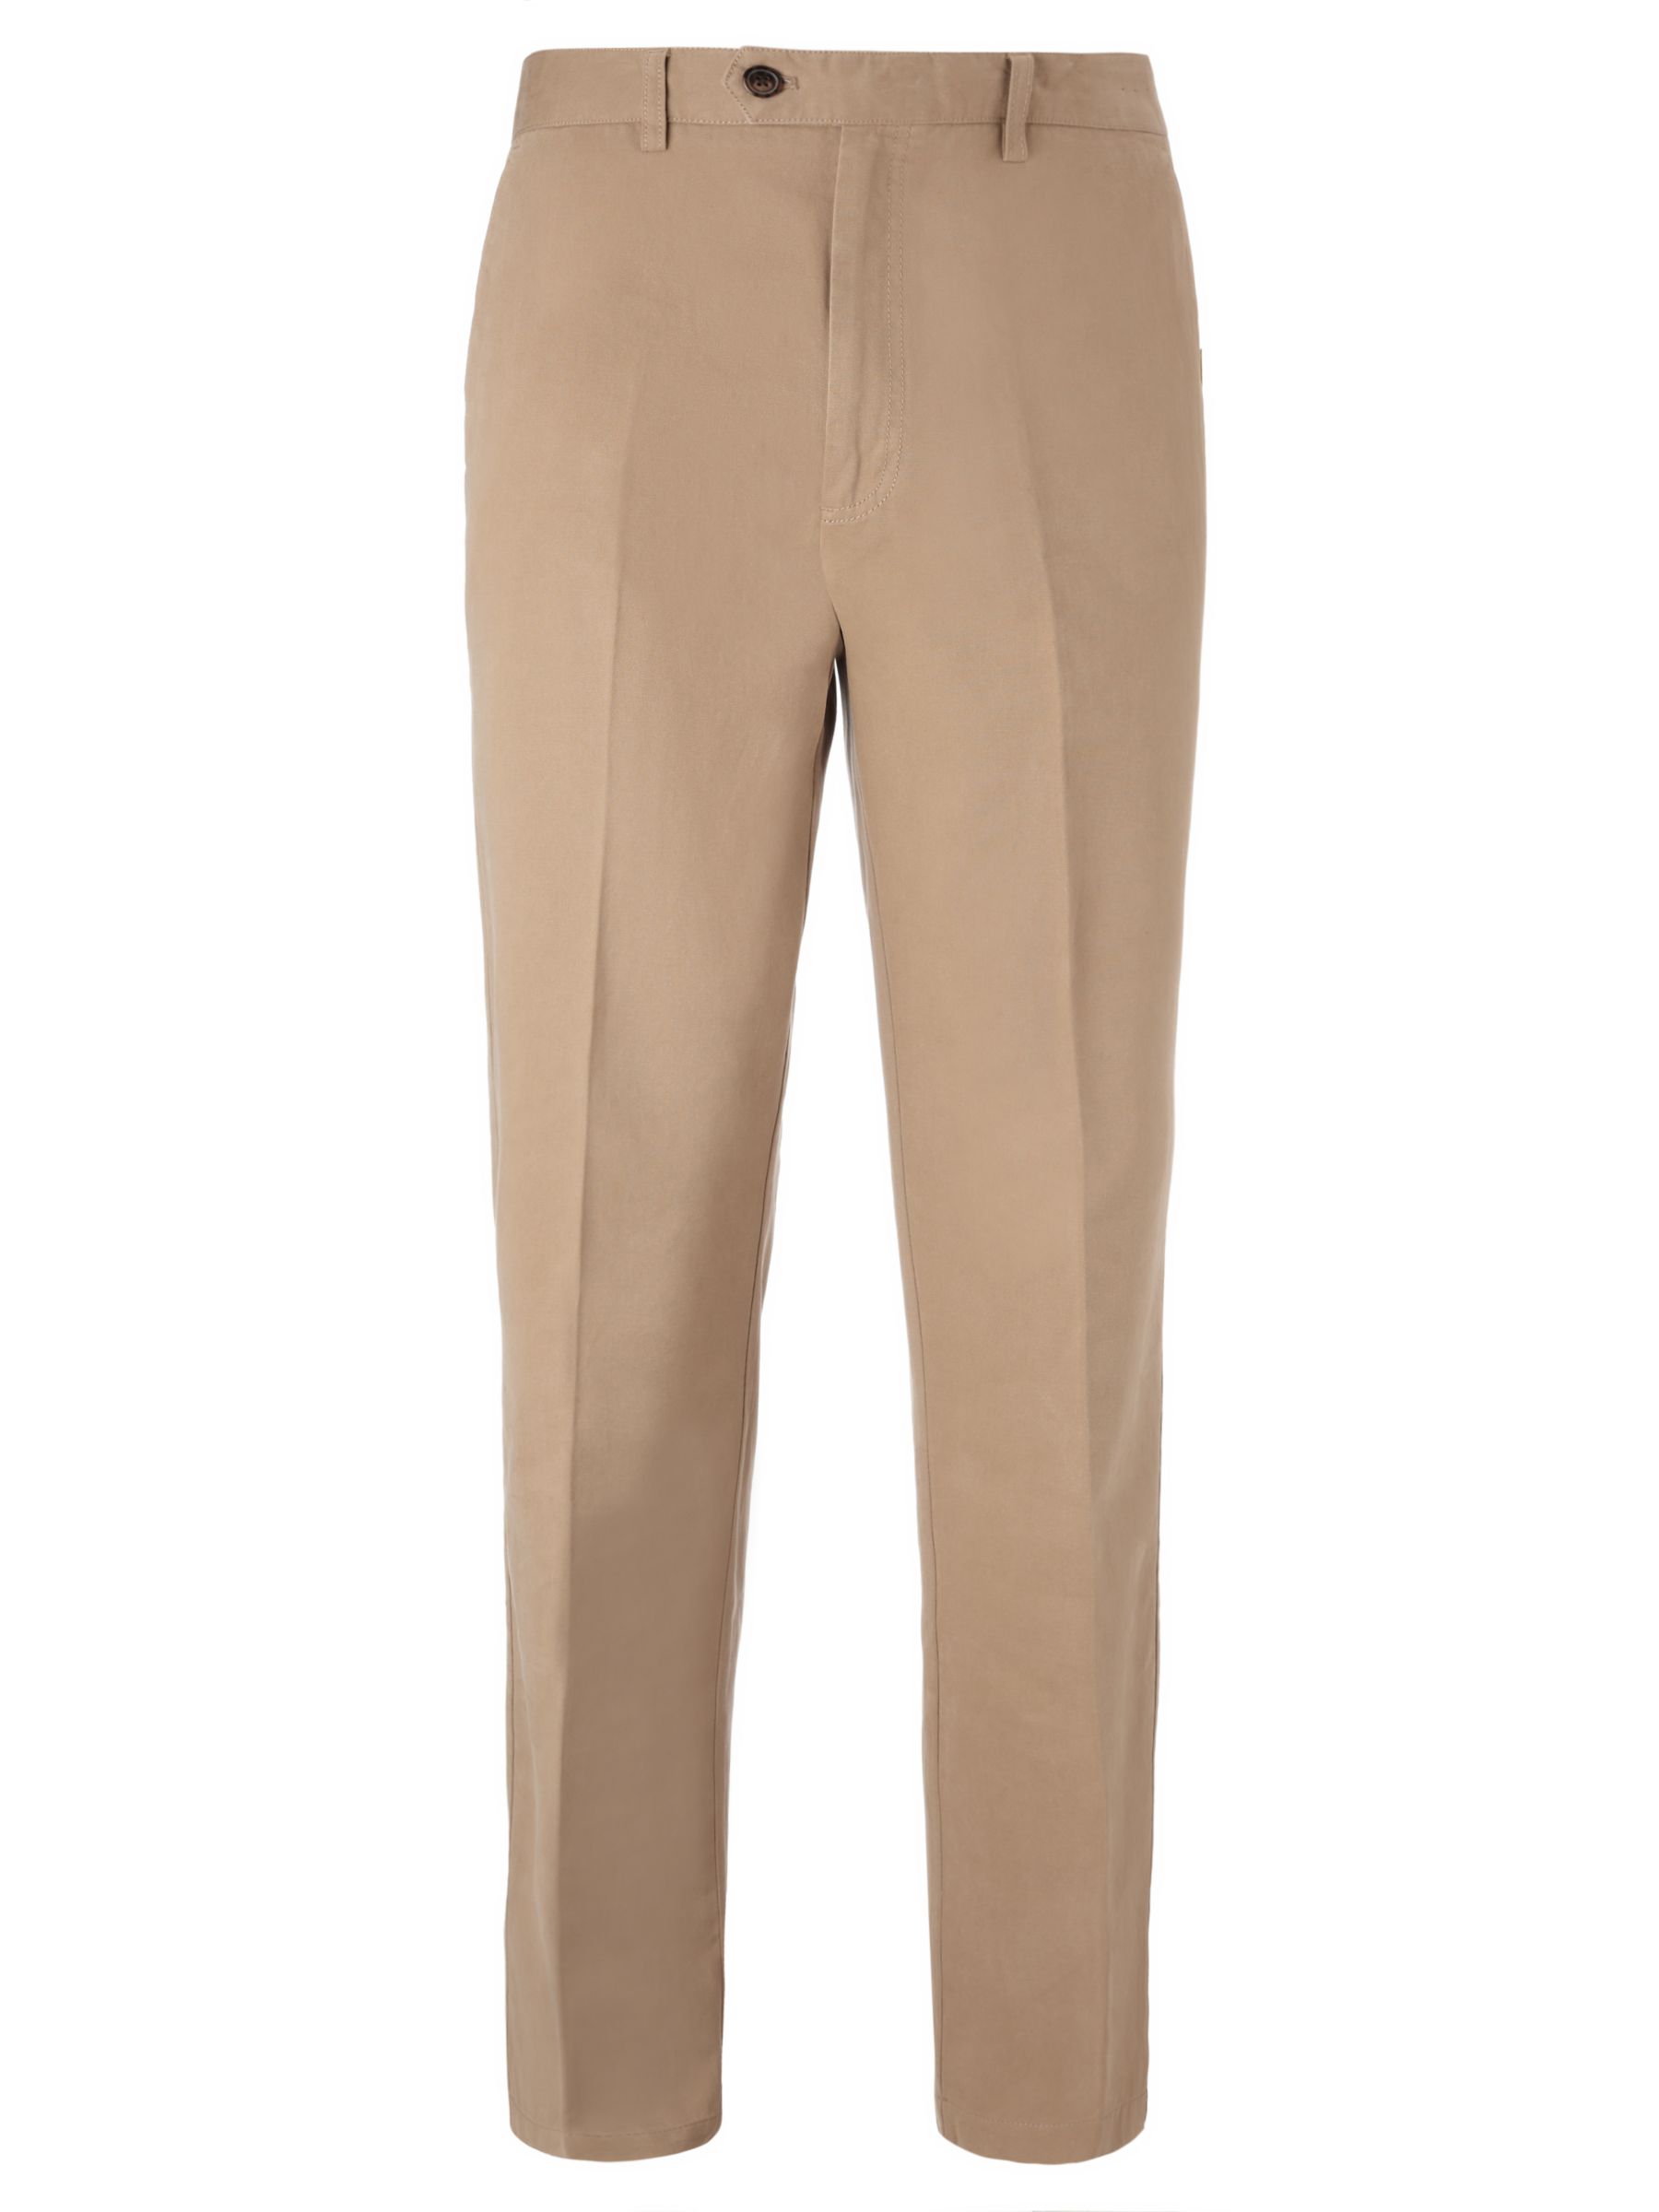 John Lewis & Partners Wrinkle Free Flat Front Trousers, Stone, 32L